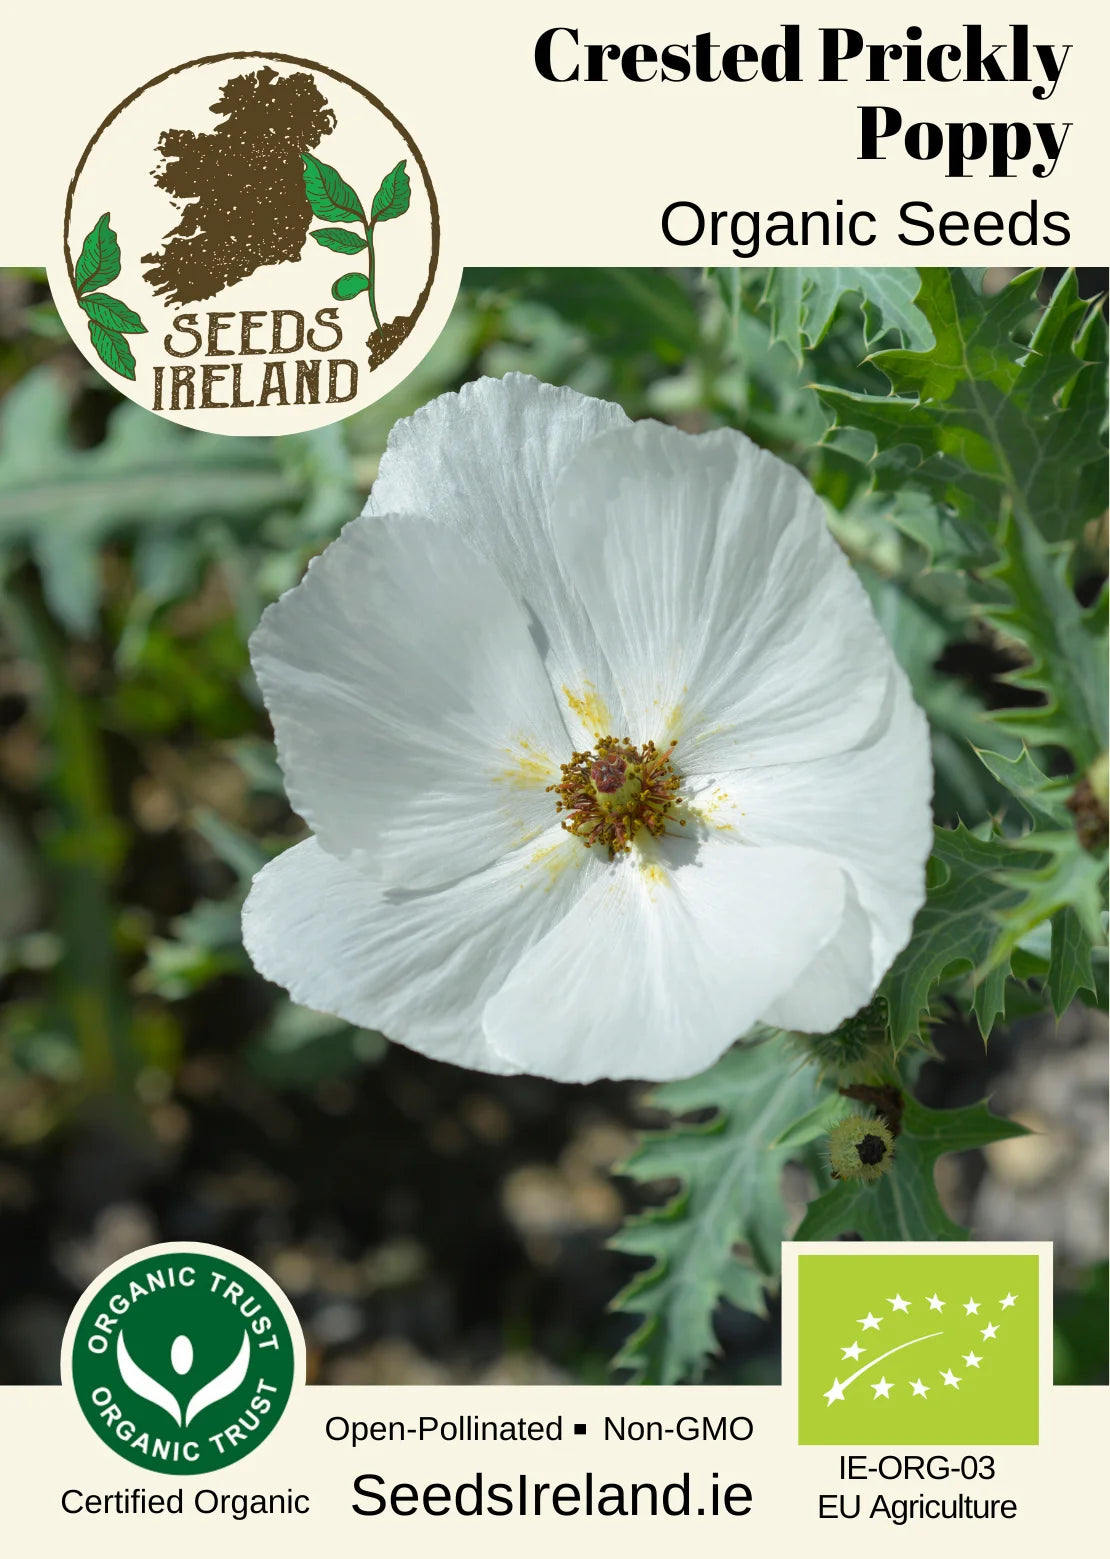 Crested Prickly Poppy Organic Seed